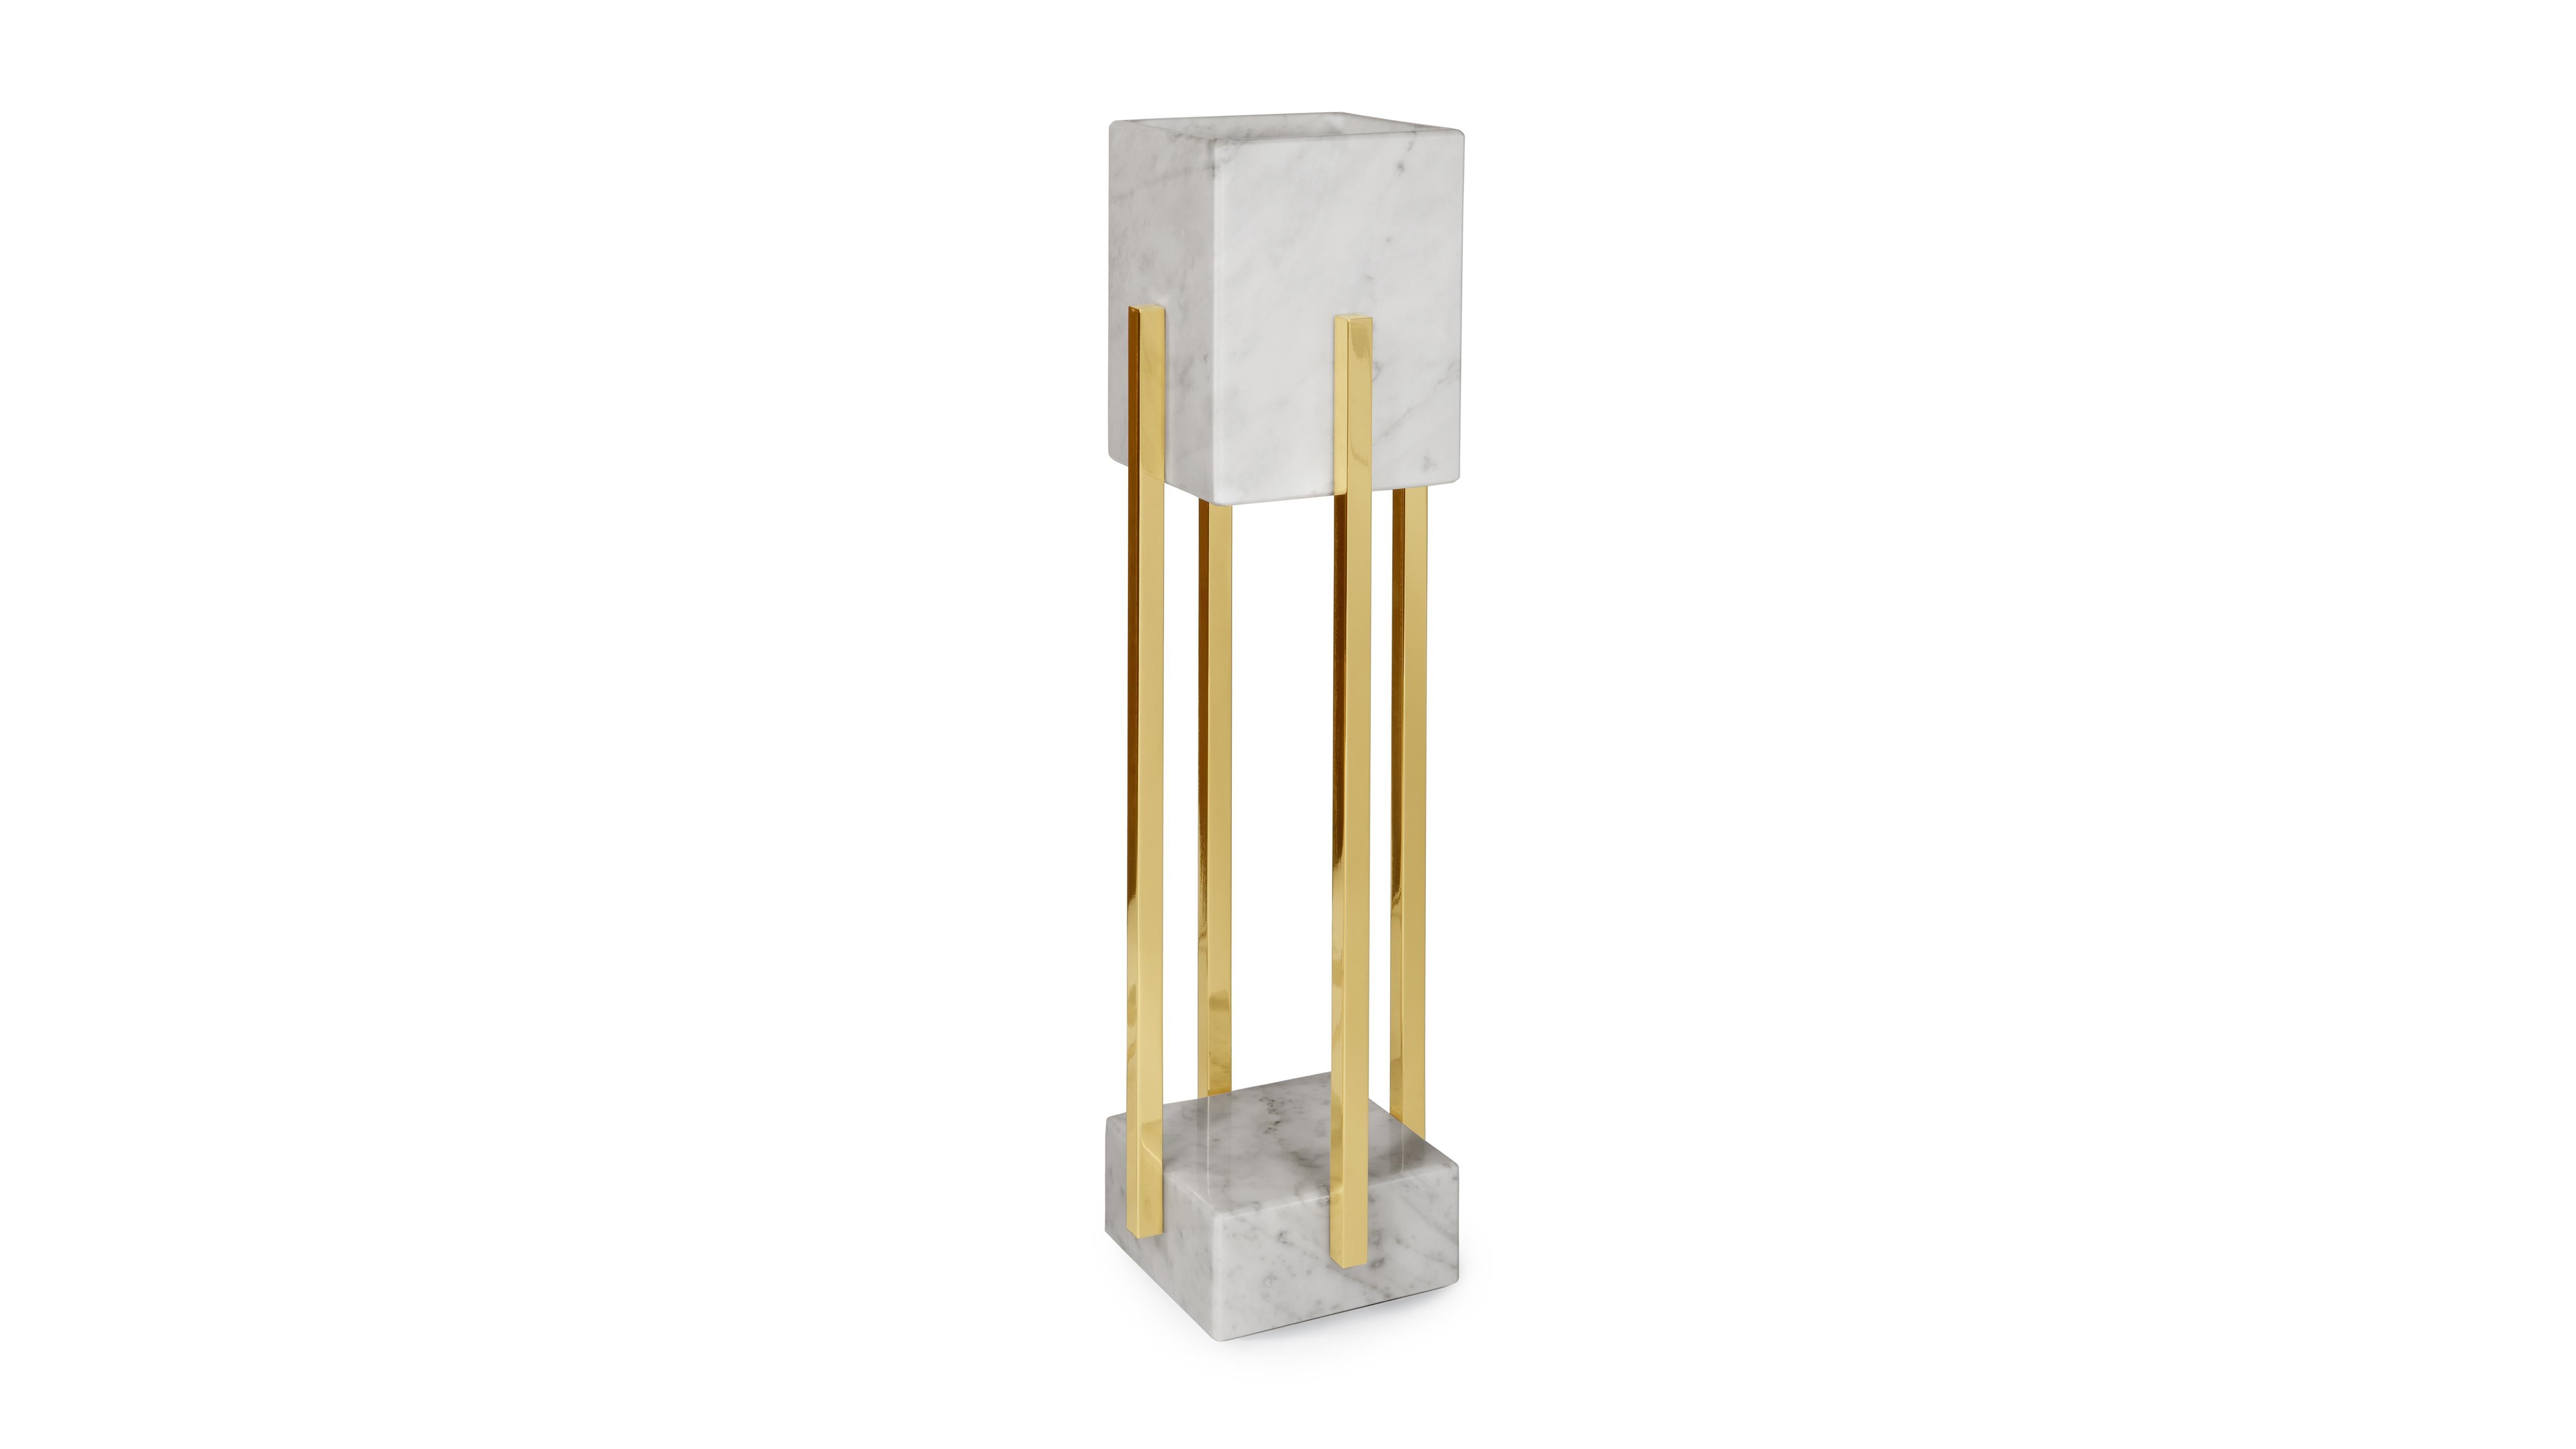 Looshaus Carrara Marble and Brass Table Lamp by InsidherLand
Dimensions: D 14 x W 14 x H 56 cm.
Materials: Carrara marble, polished brass.
4.3 kg.
Available in other marbles and metals.

The Looshaus building by Architect Adolf Loos in Vienna marked